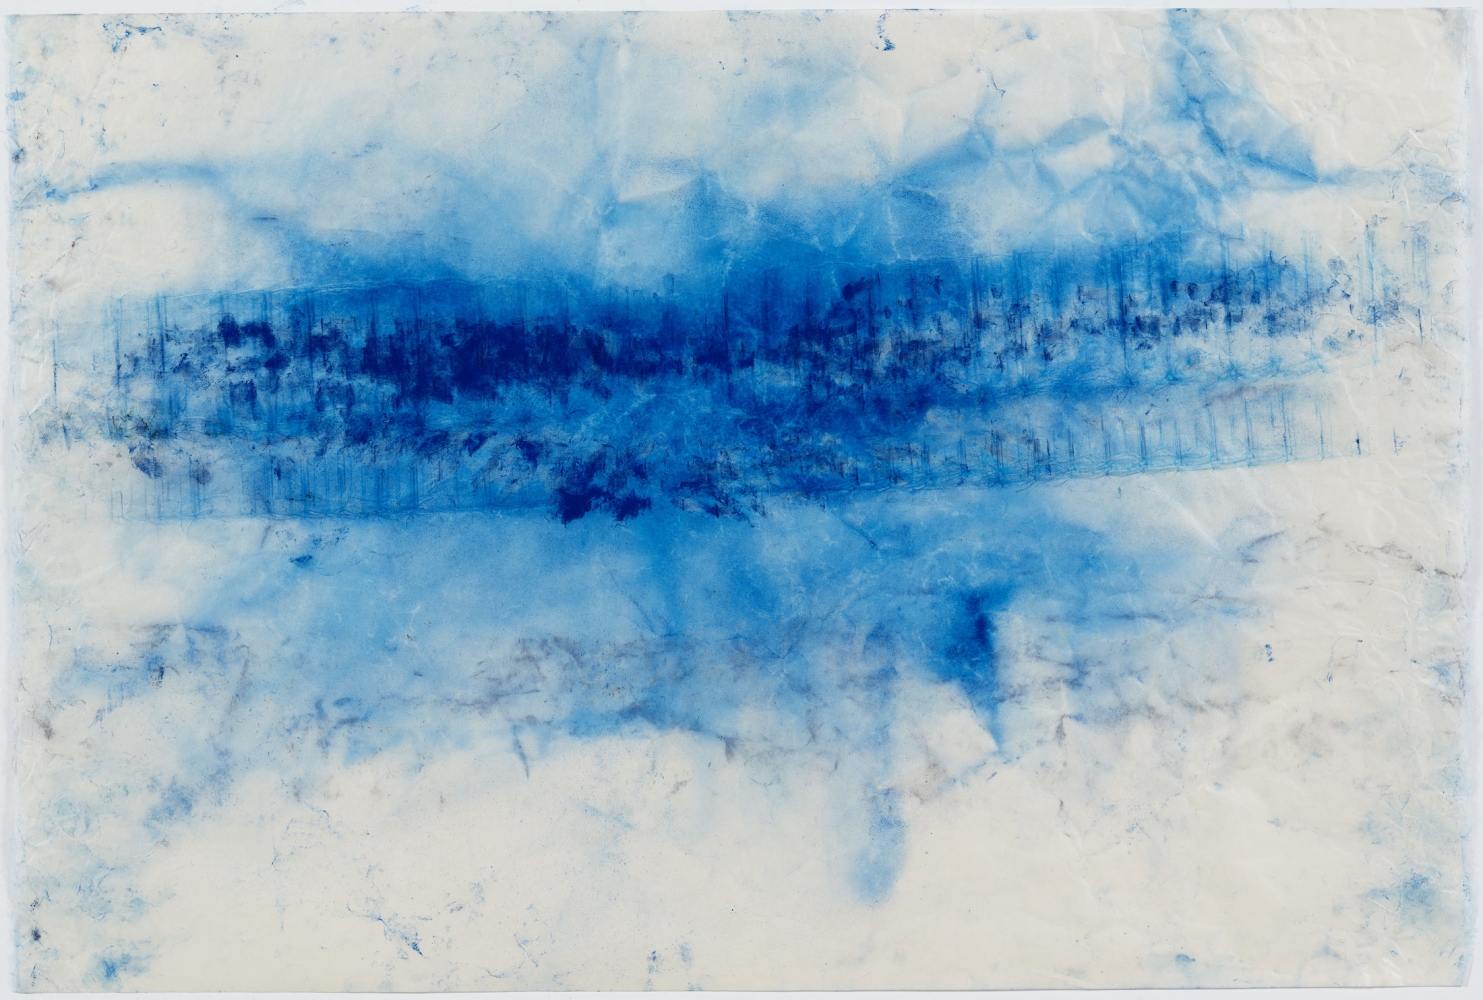 Jason Moran
Went wild and left in Silence, 2020
Pigment on Gampi paper
25 1/8 x 37 1/2 inches
(63.8 x 95.3 cm)